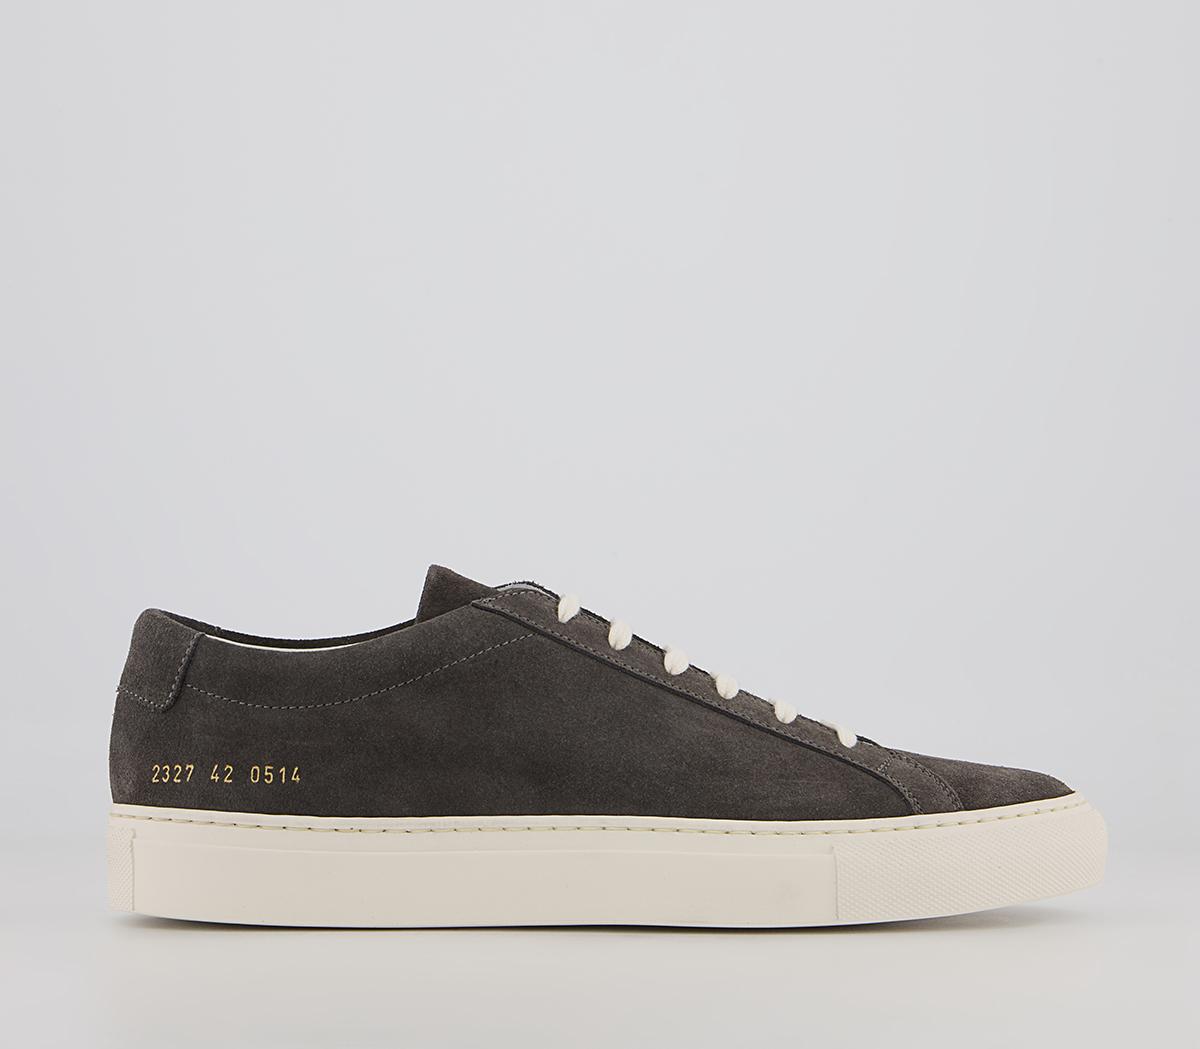 Common ProjectsAchilles Low Trainers MWashed Black Black Suede